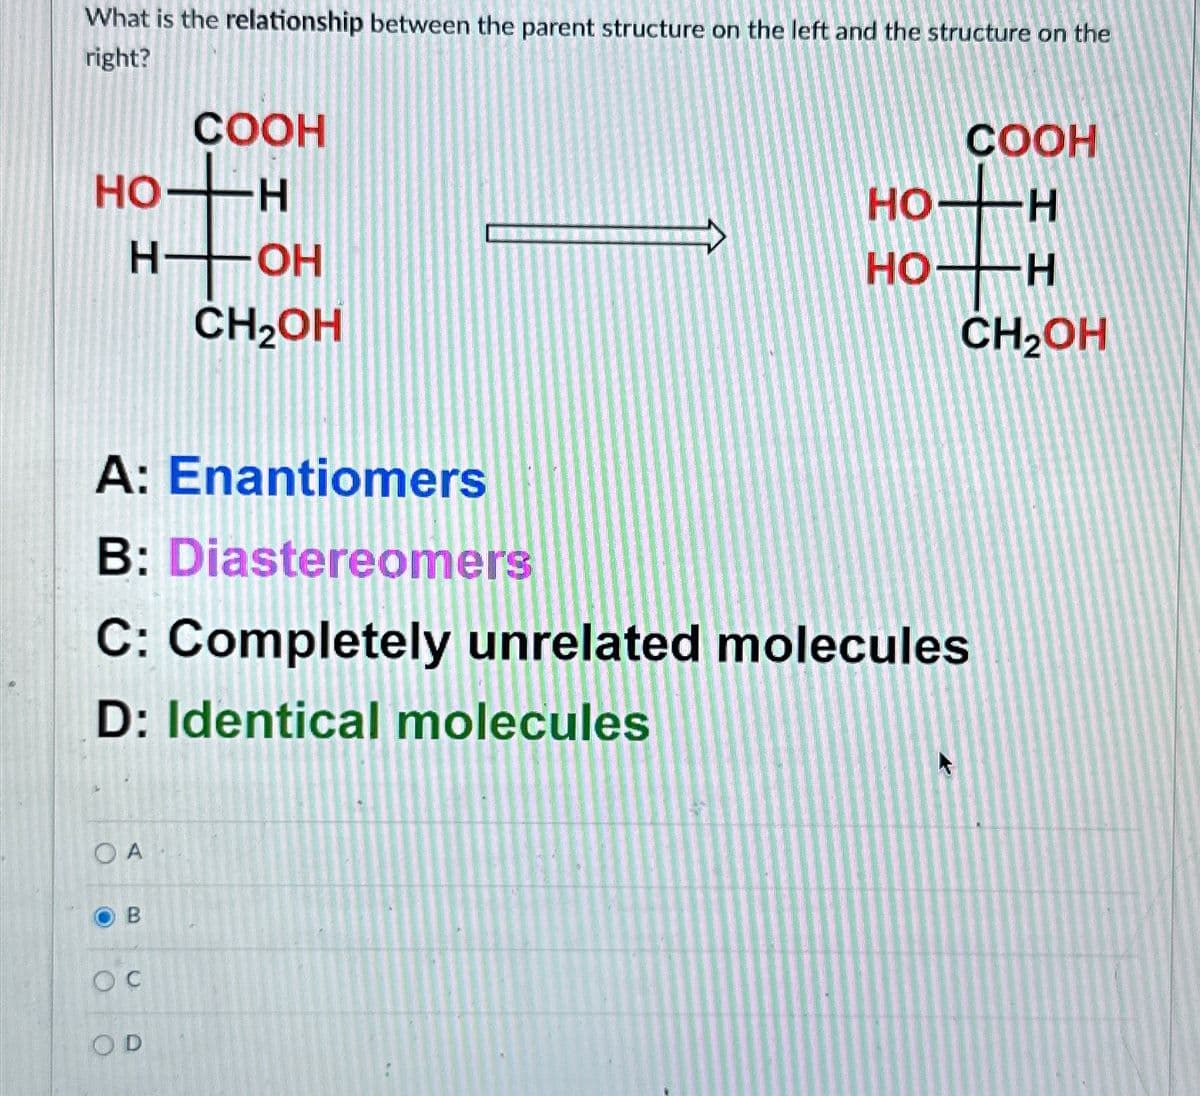 COOH
What is the relationship between the parent structure on the left and the structure on the
right?
HTOH
COOH
тон
H-OH
HO H
CH₂OH
H― OH
CH2OH
A: Enantiomers
B: Diastereomers
C: Completely unrelated molecules
D: Identical molecules
OA
oc
OD
B